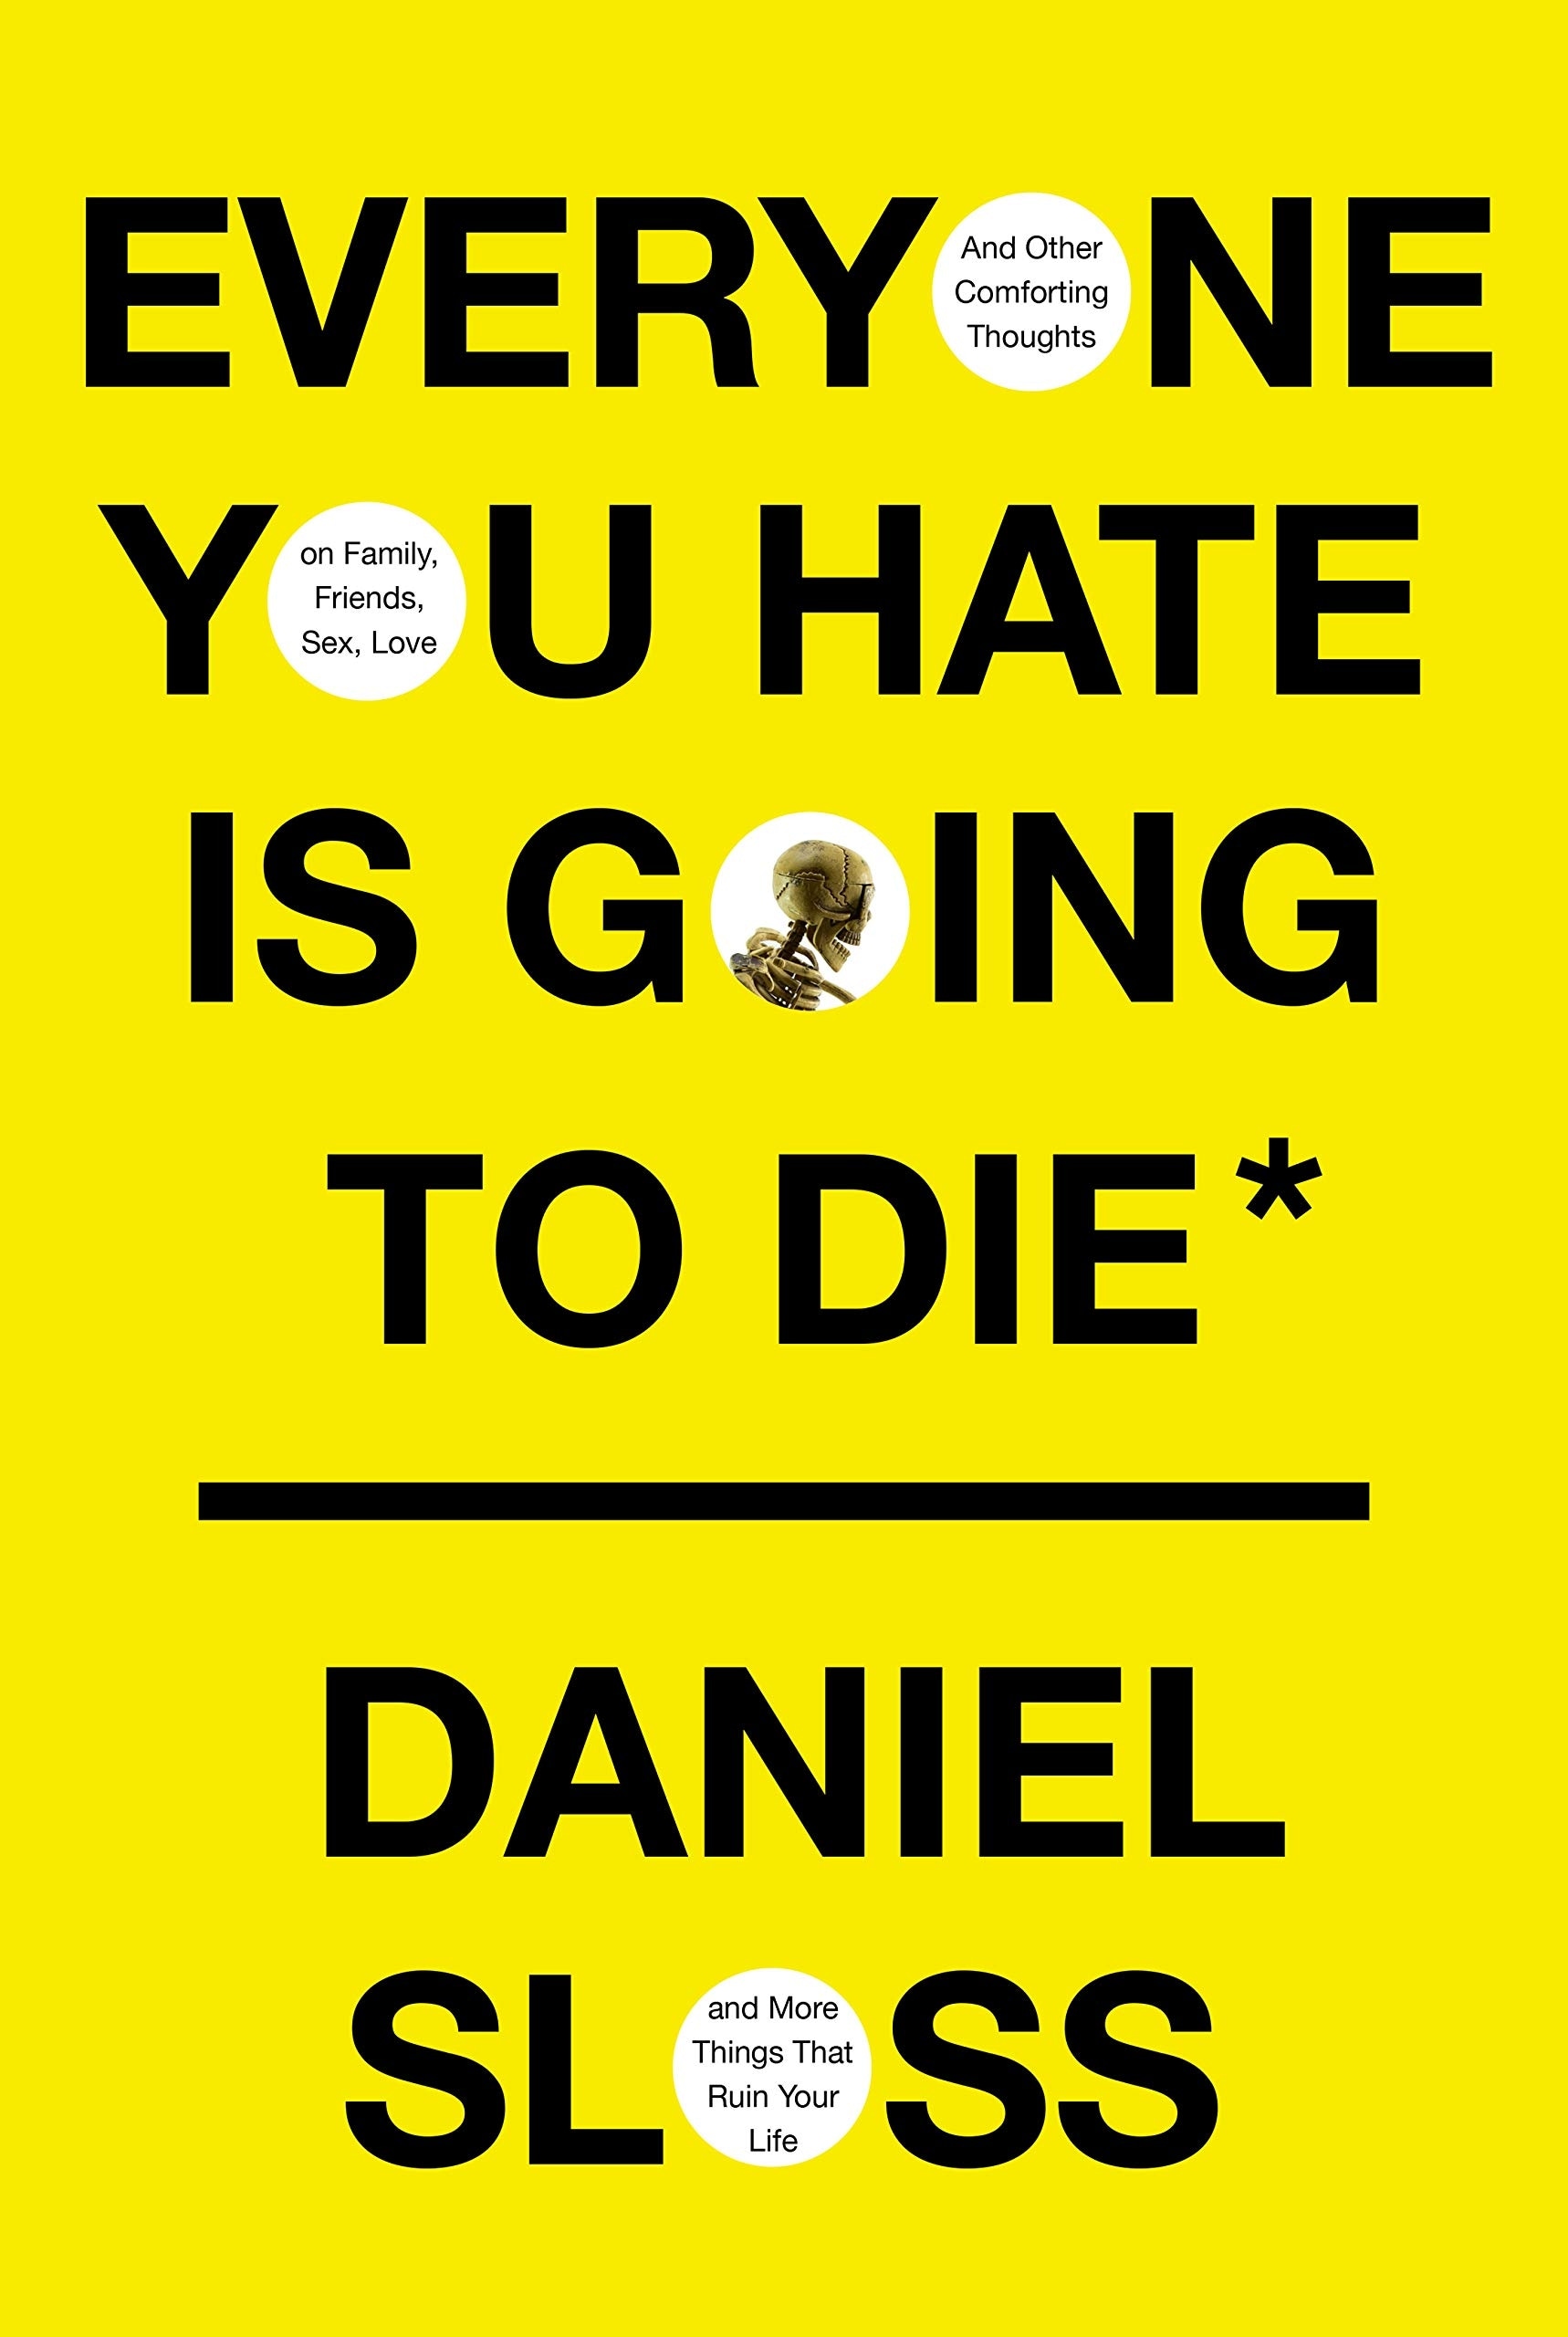 Book “Everyone You Hate is Going to Die” by Daniel Sloss — October 12, 2021